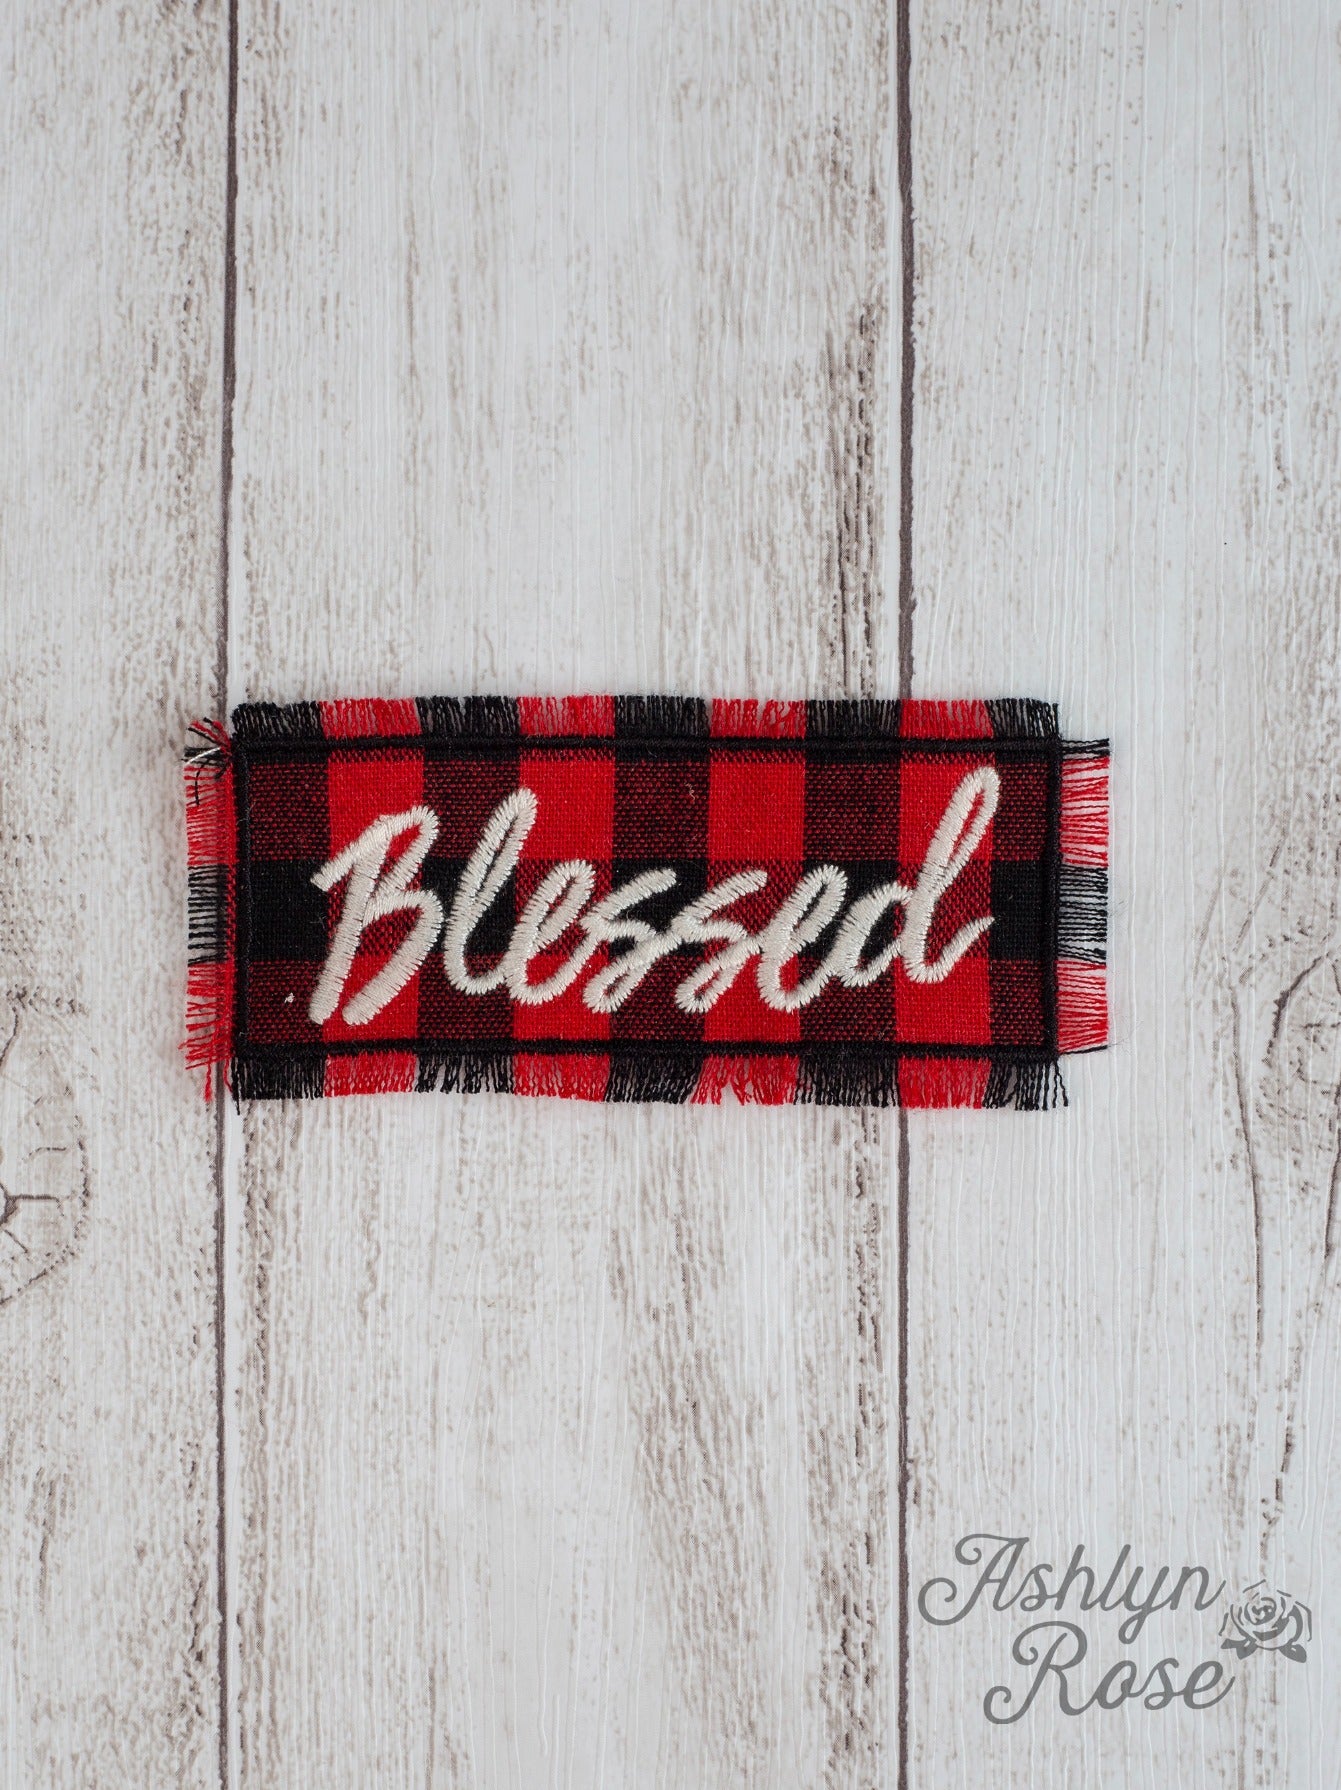 Buffalo Plaid Blessed Patch on Black Distressed Hat